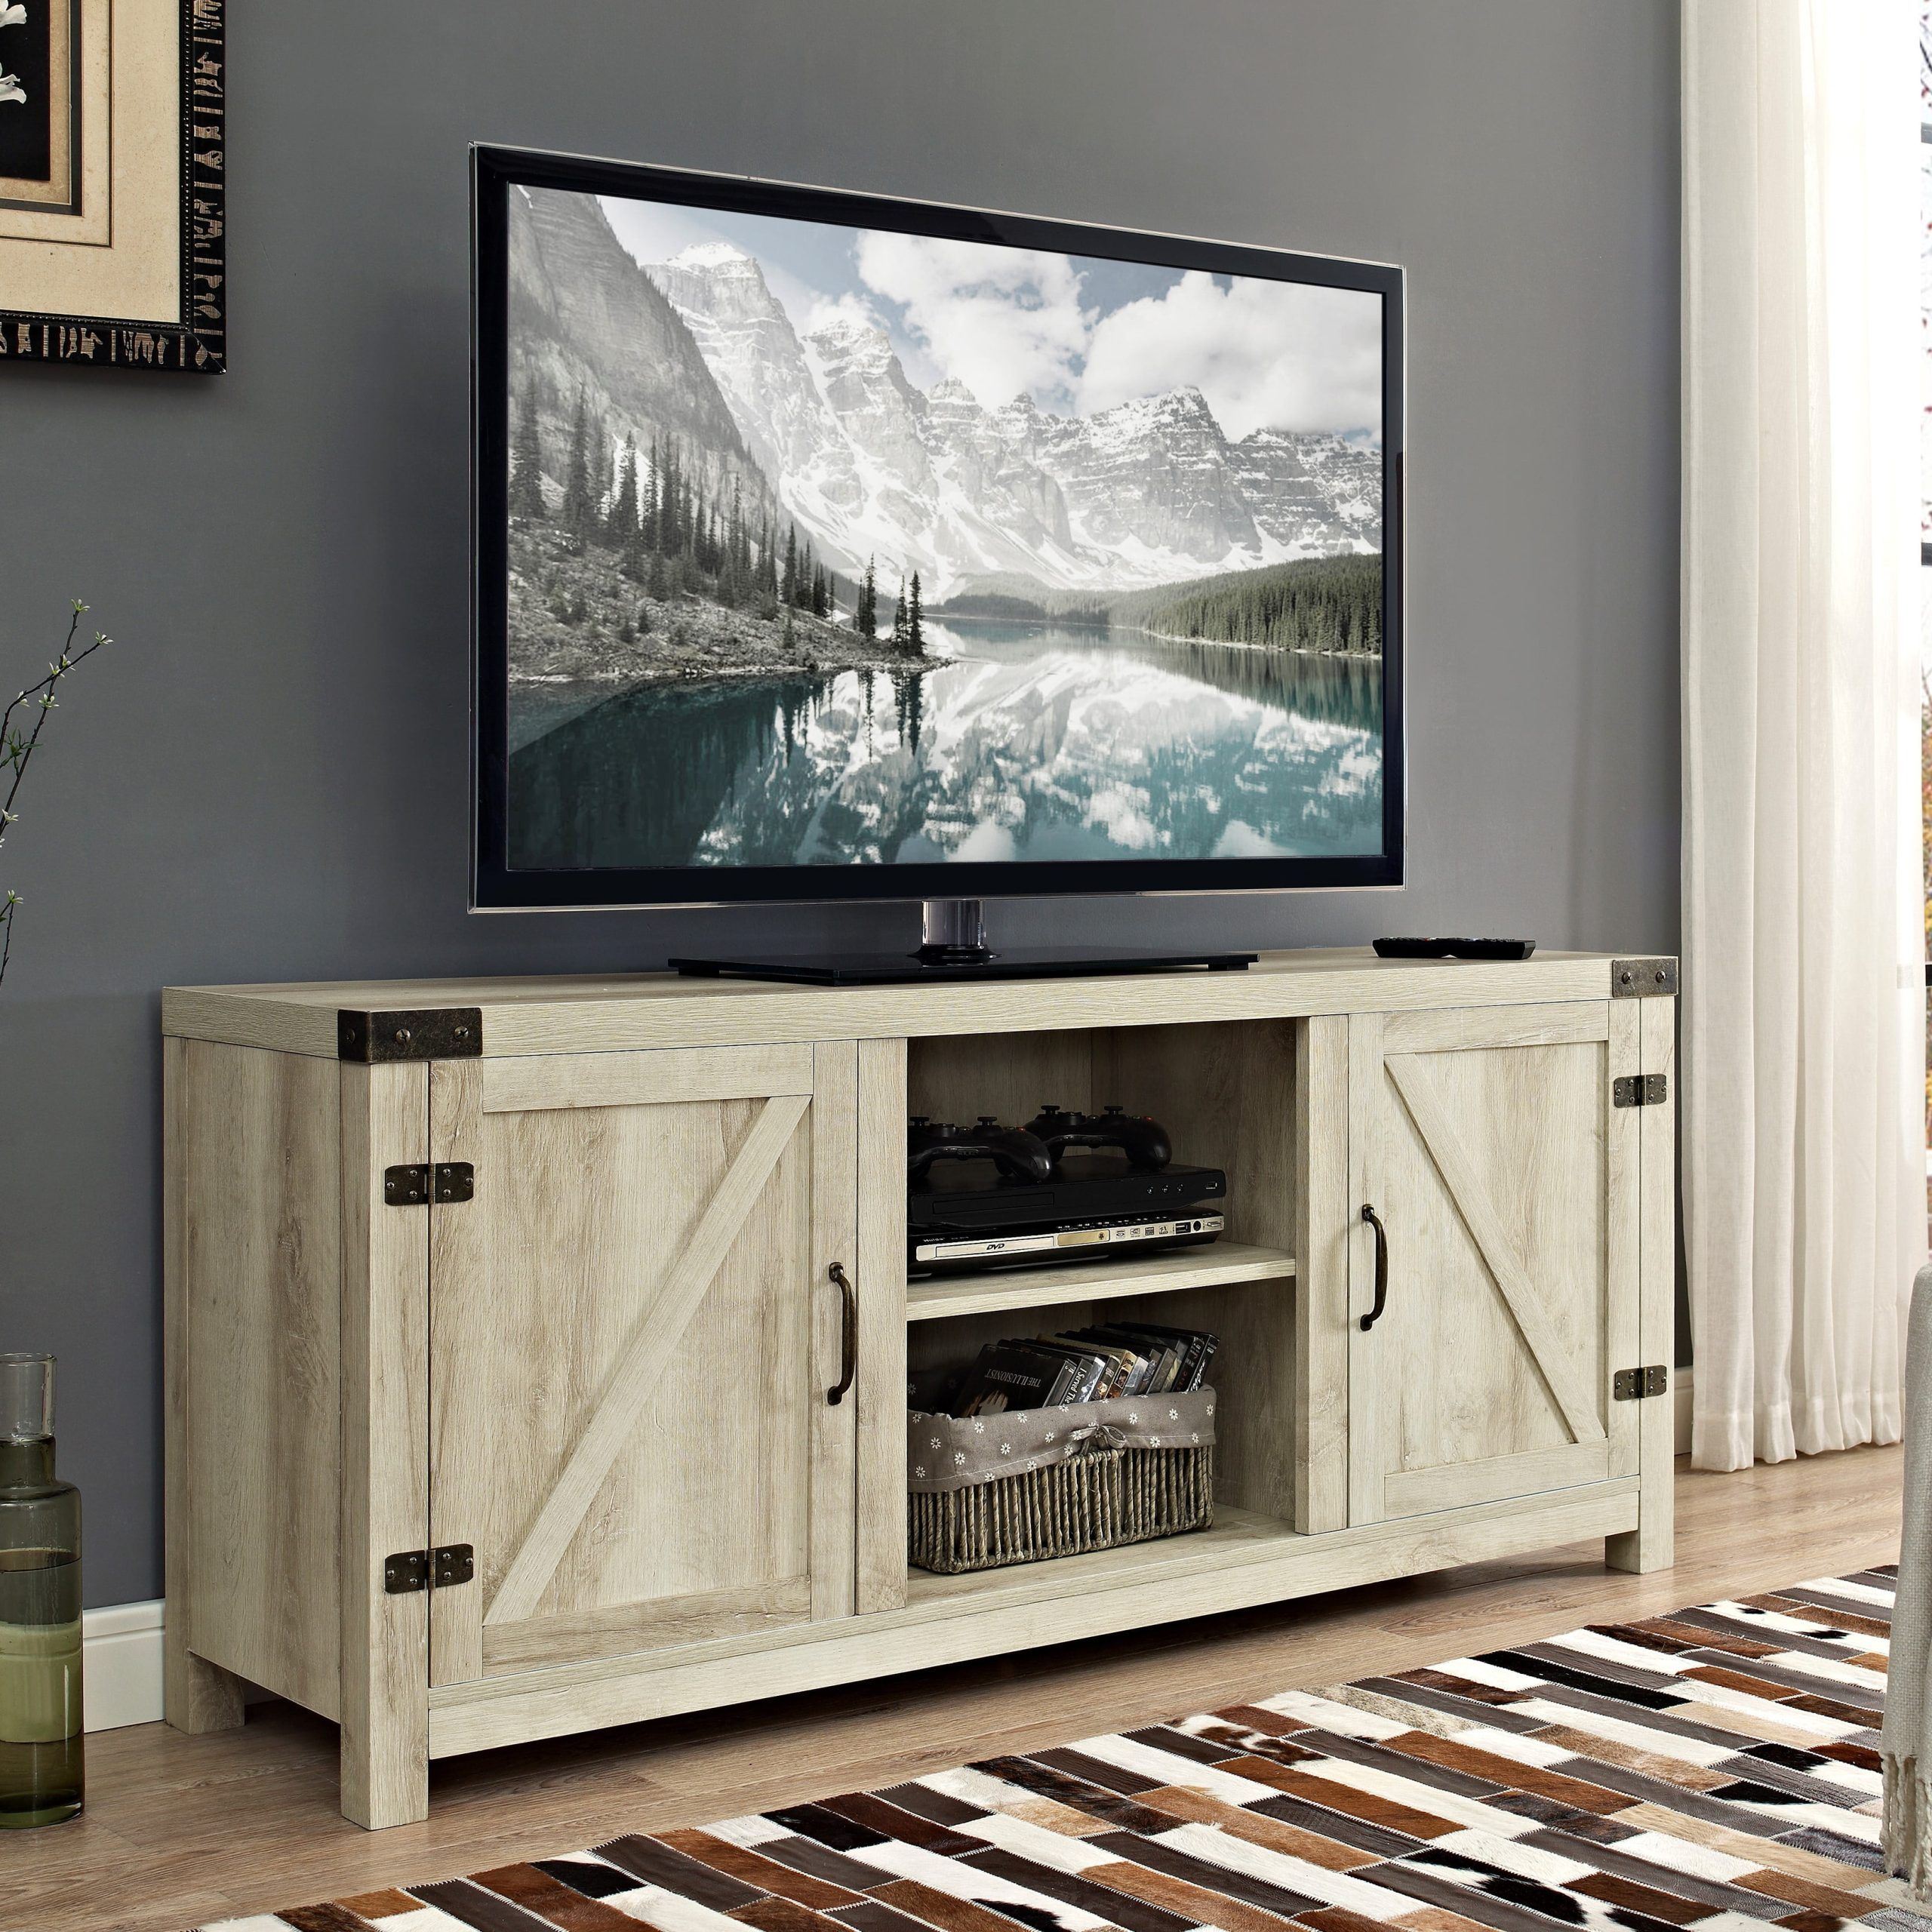 Woven Paths Modern Farmhouse Barn Door Tv Stand For Tvs Up To 65 Intended For Farmhouse Tv Stands (View 14 of 20)